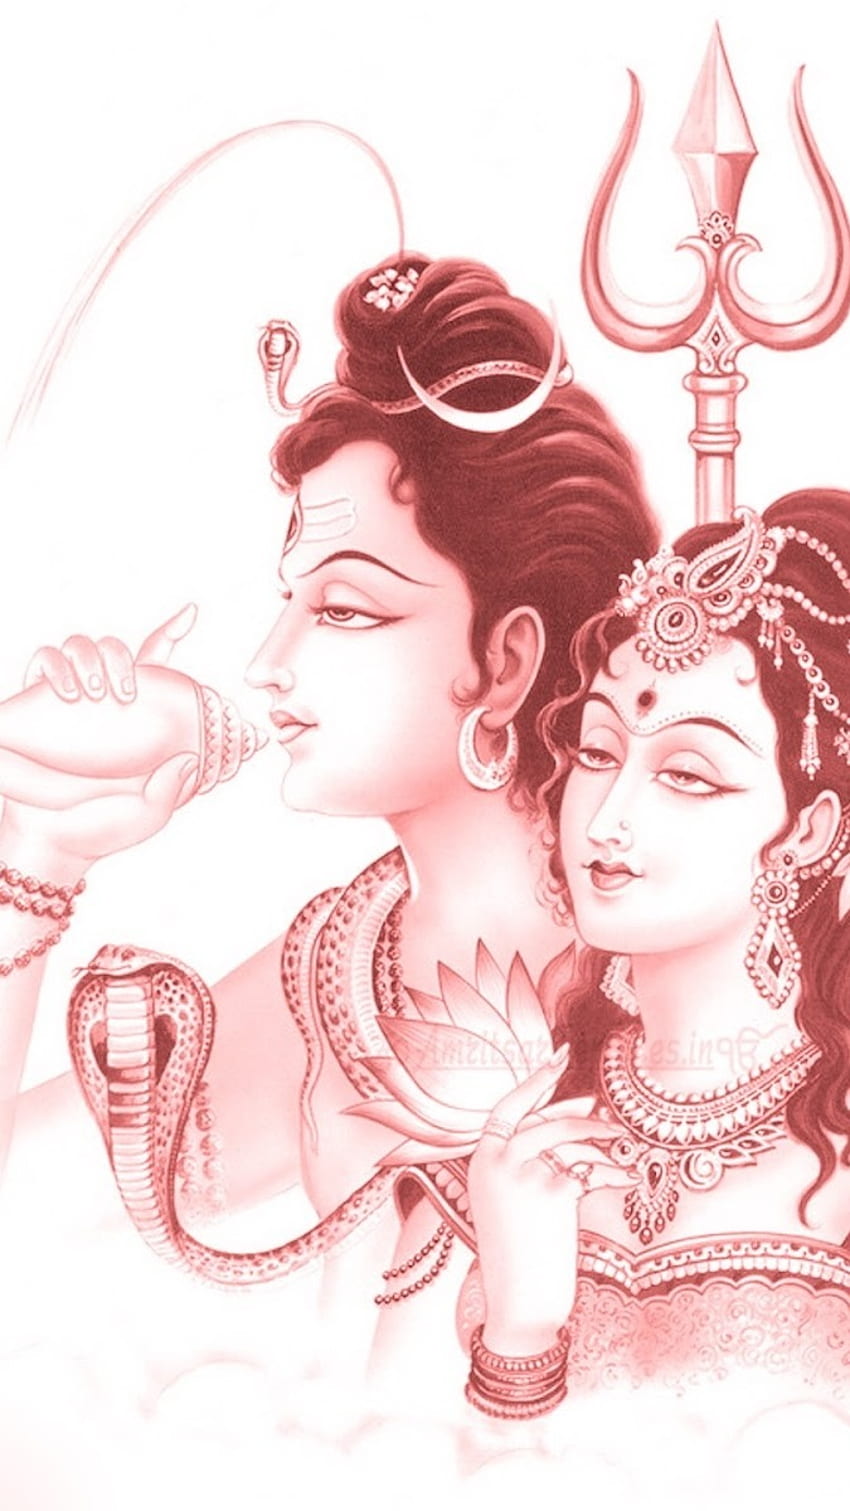 Shiv Parvati Love Art | Shiv Parvati Paintings And Drawings Images